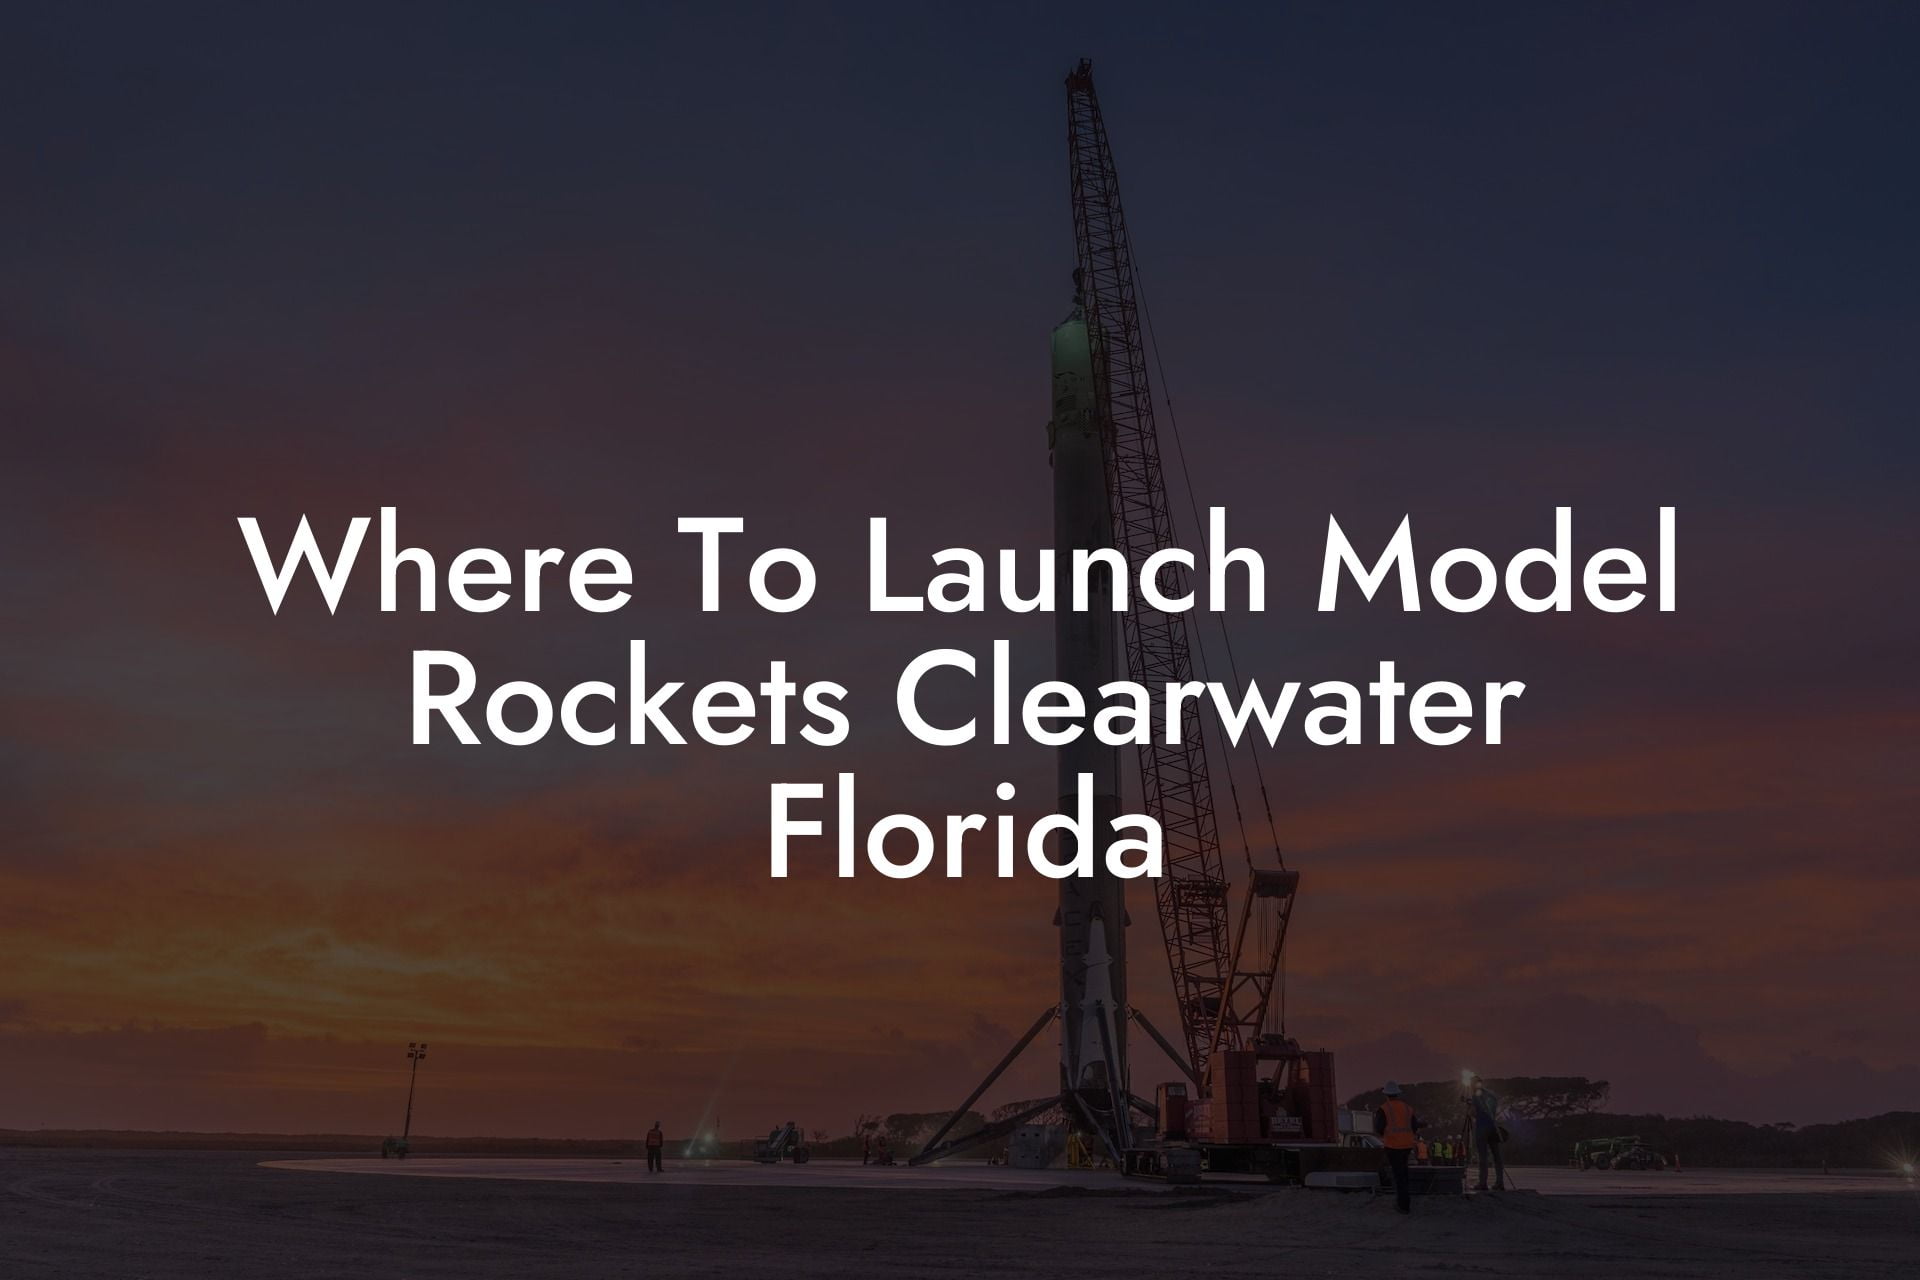 Where To Launch Model Rockets Clearwater Florida